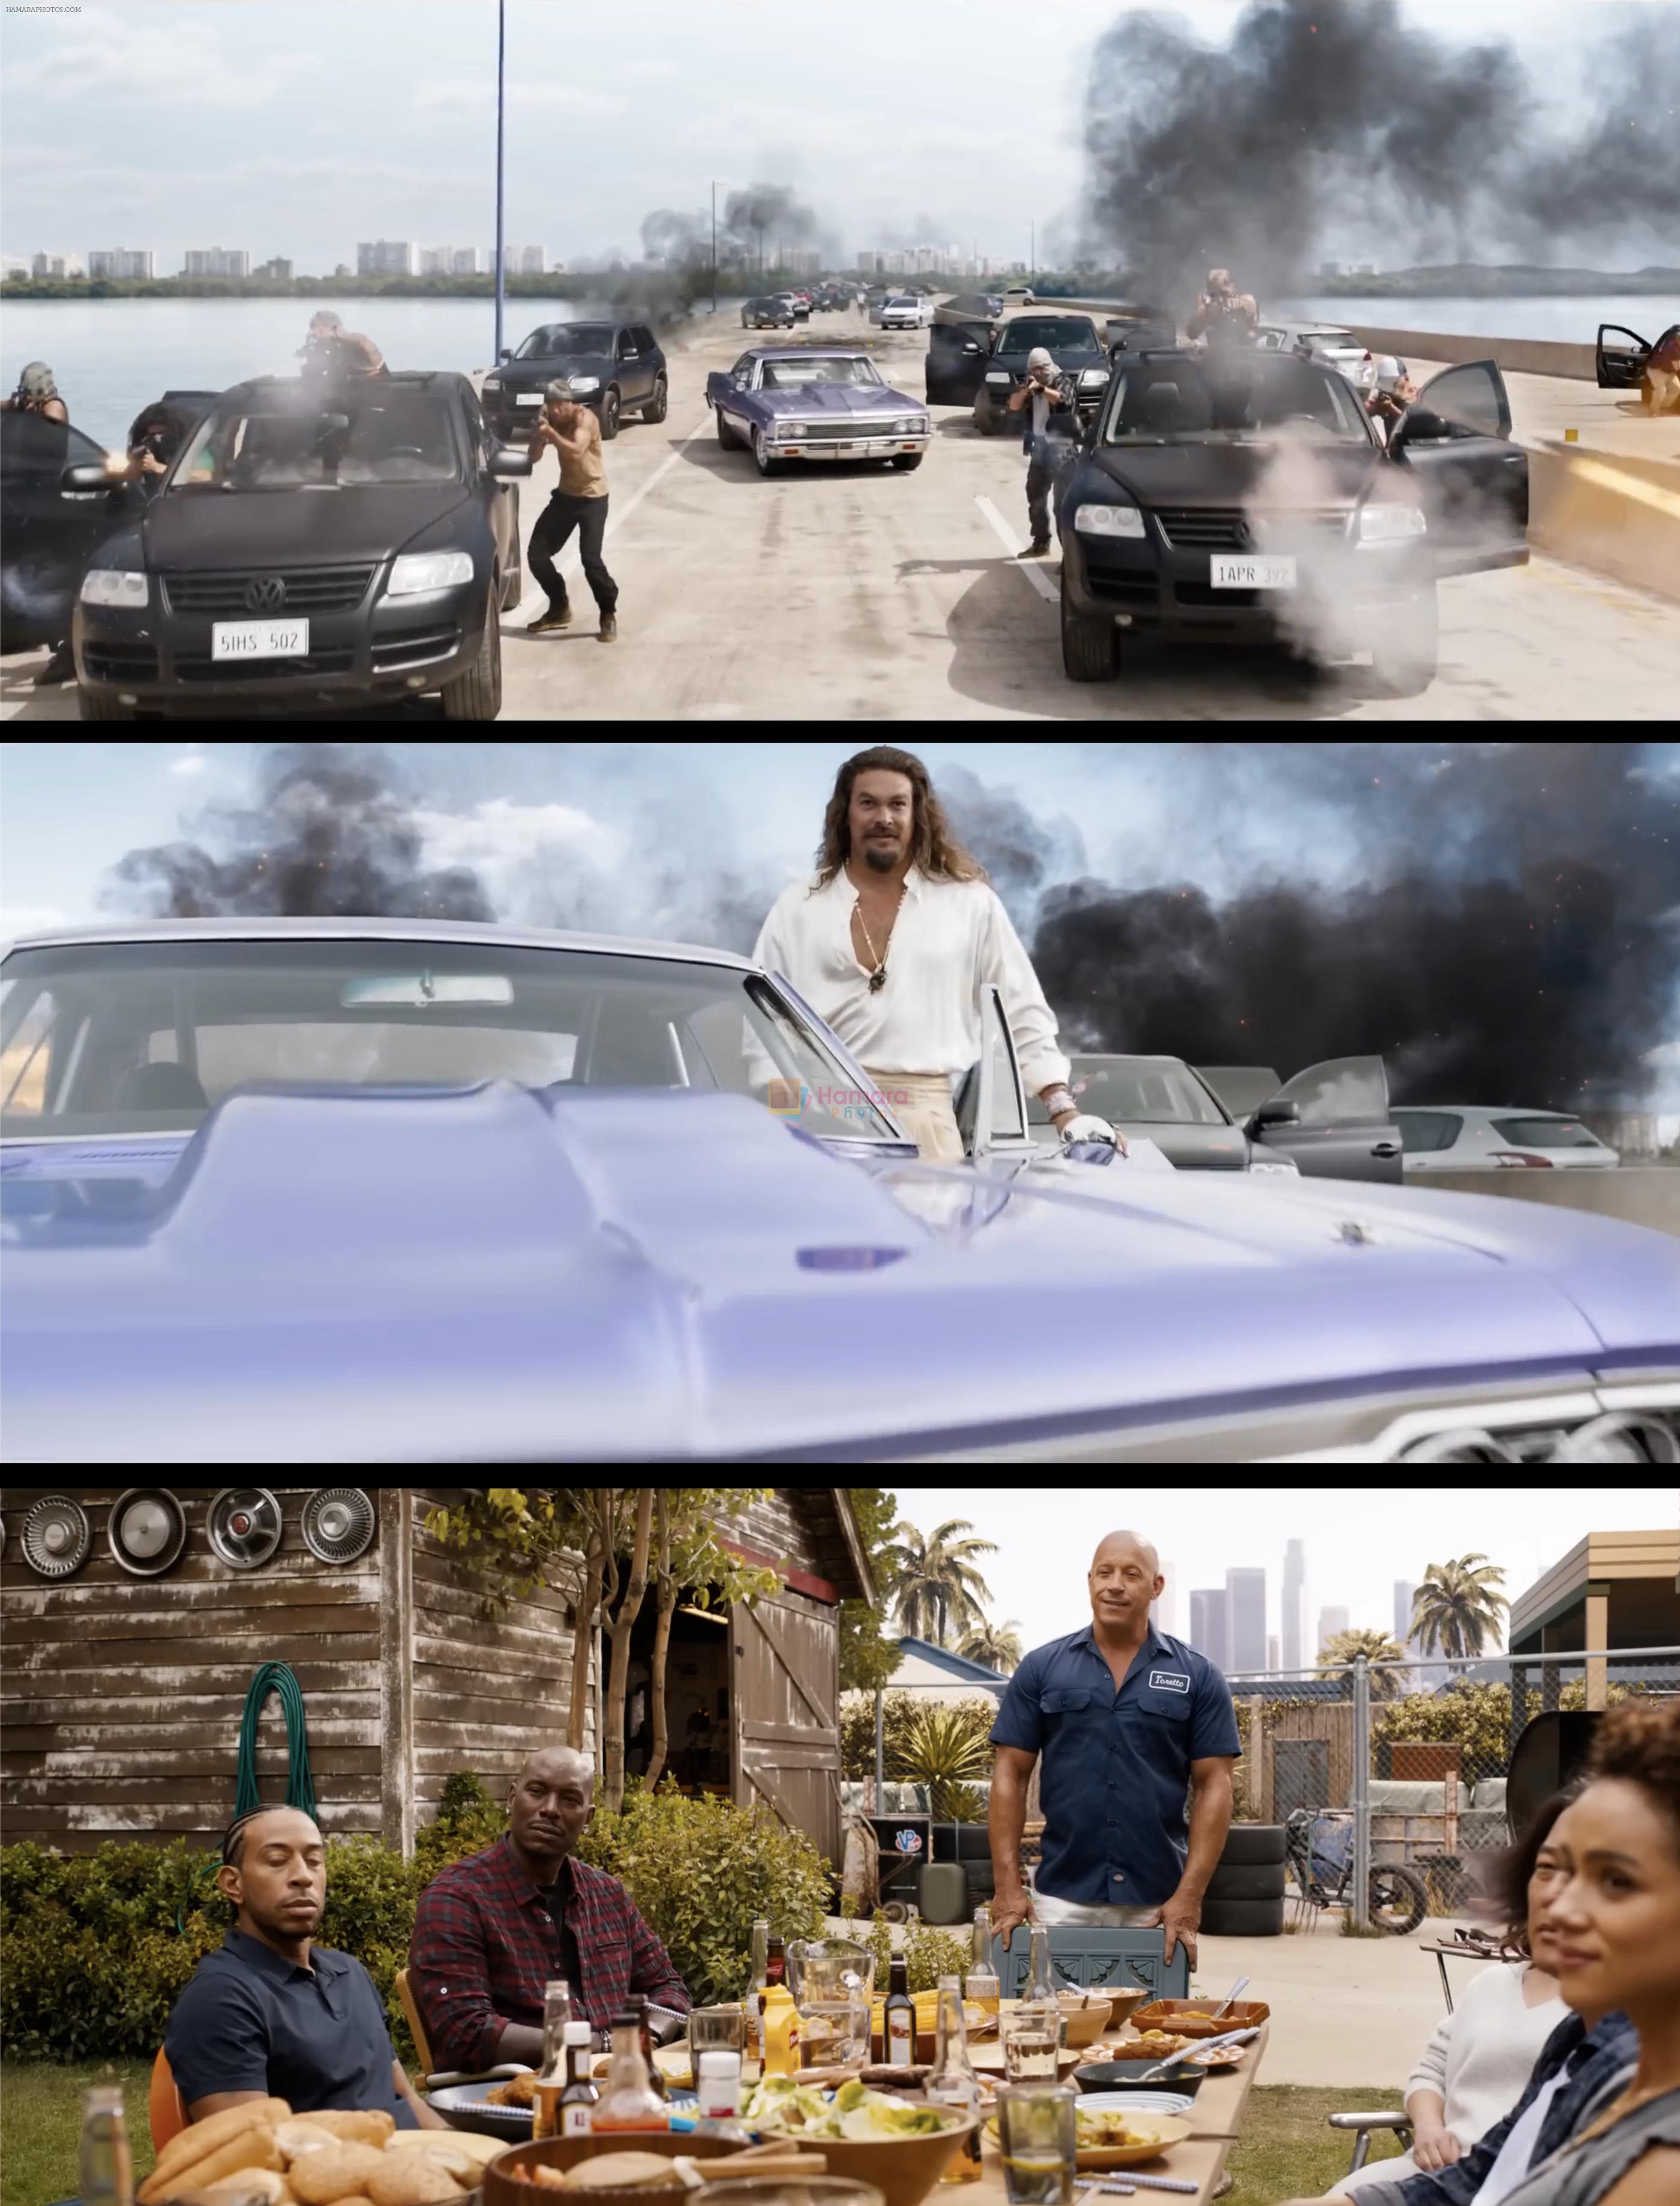 Ludacris as Tej Parker, Nathalie Emmanuel as Ramsey, Tyrese Gibson as Roman Pearce, Jason Momoa as Dante and Vin Diesel as Dominic Toretto in Still from movie Fast X